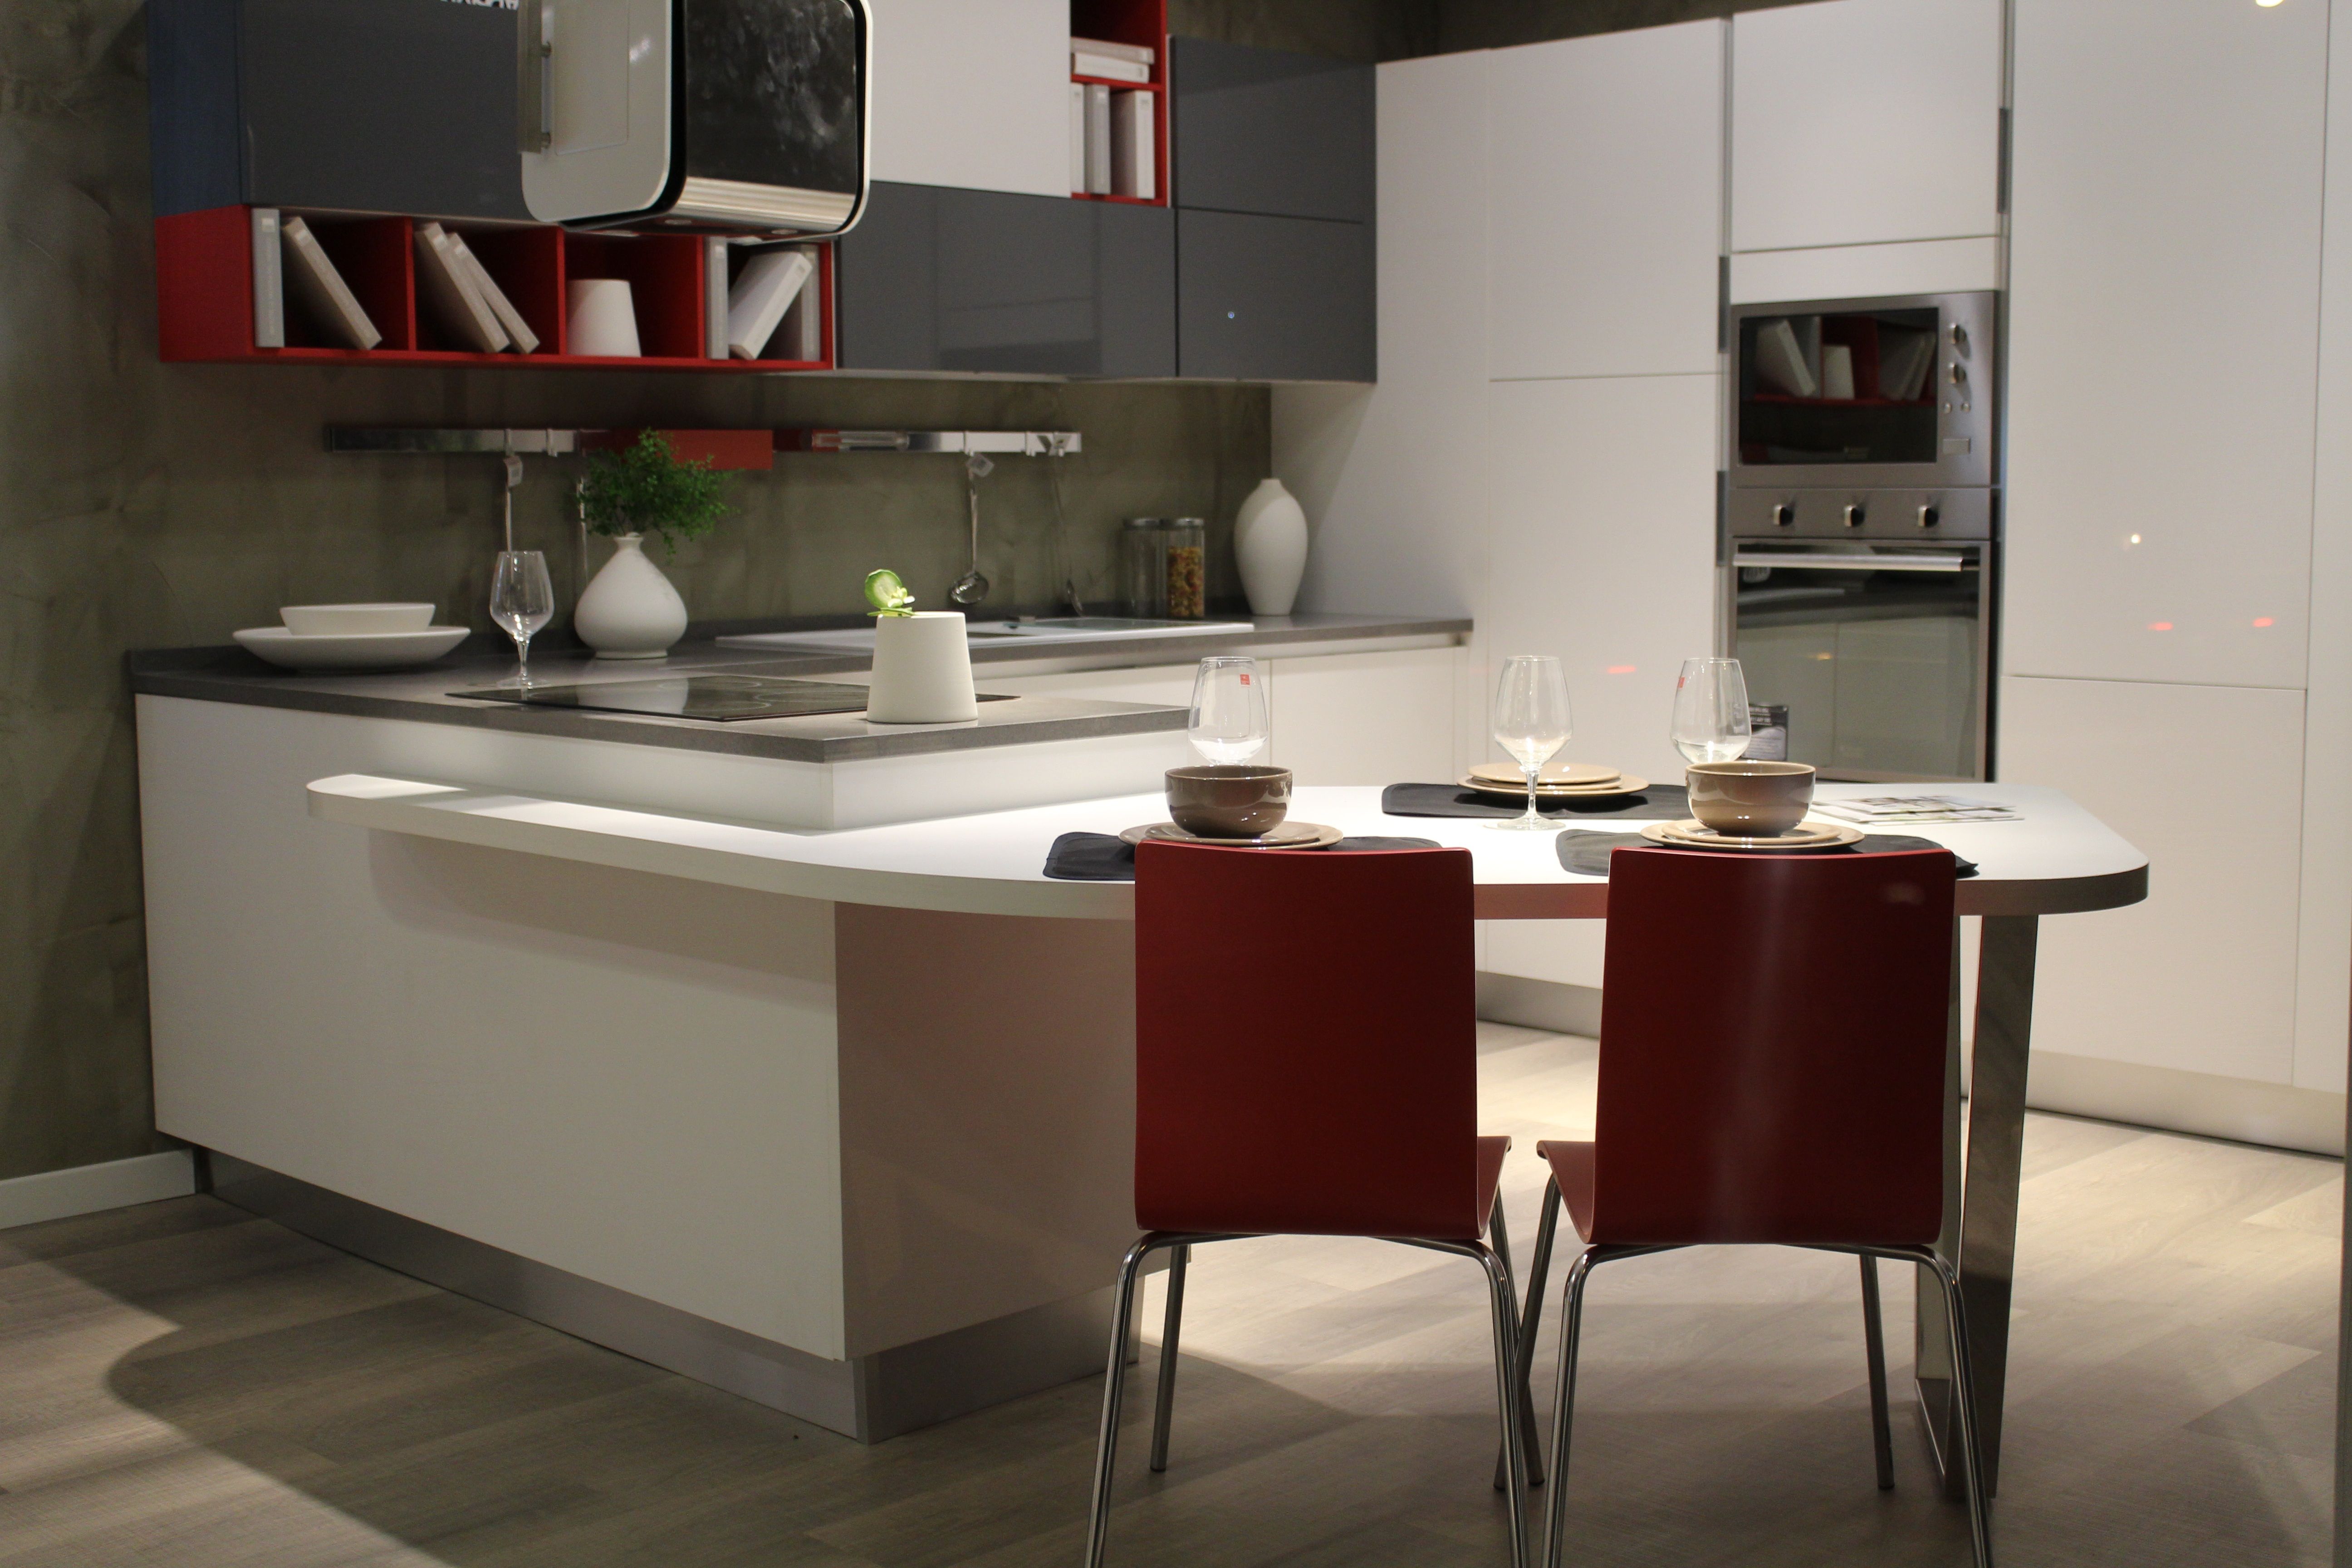 A brand new kitchen with red metal chairs, white kitchen appliances, books on the shelf and white bowl and plate sets.